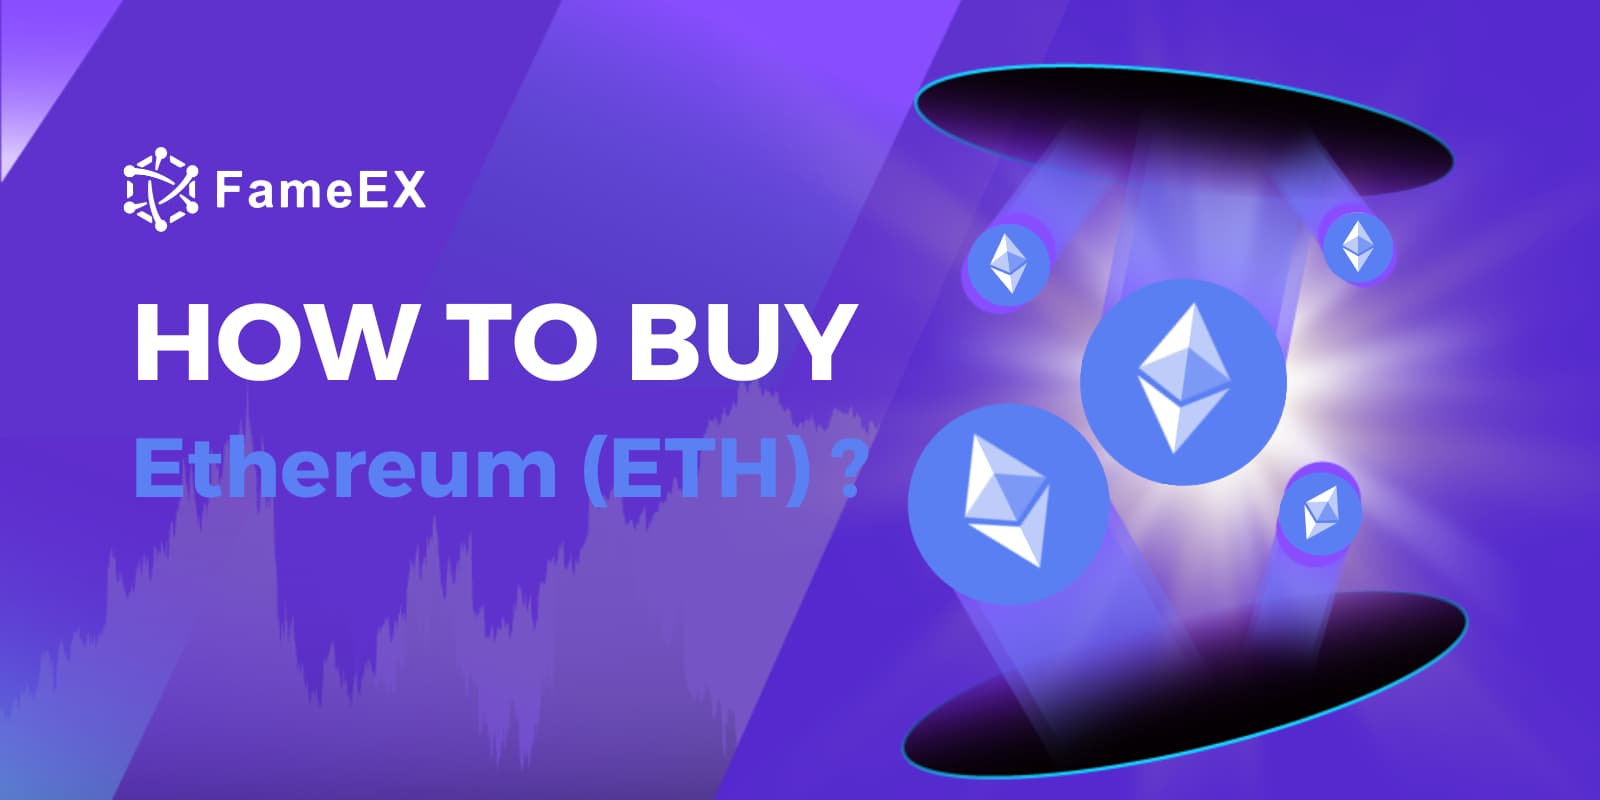 where you can buy eth instantly with credit card reddit